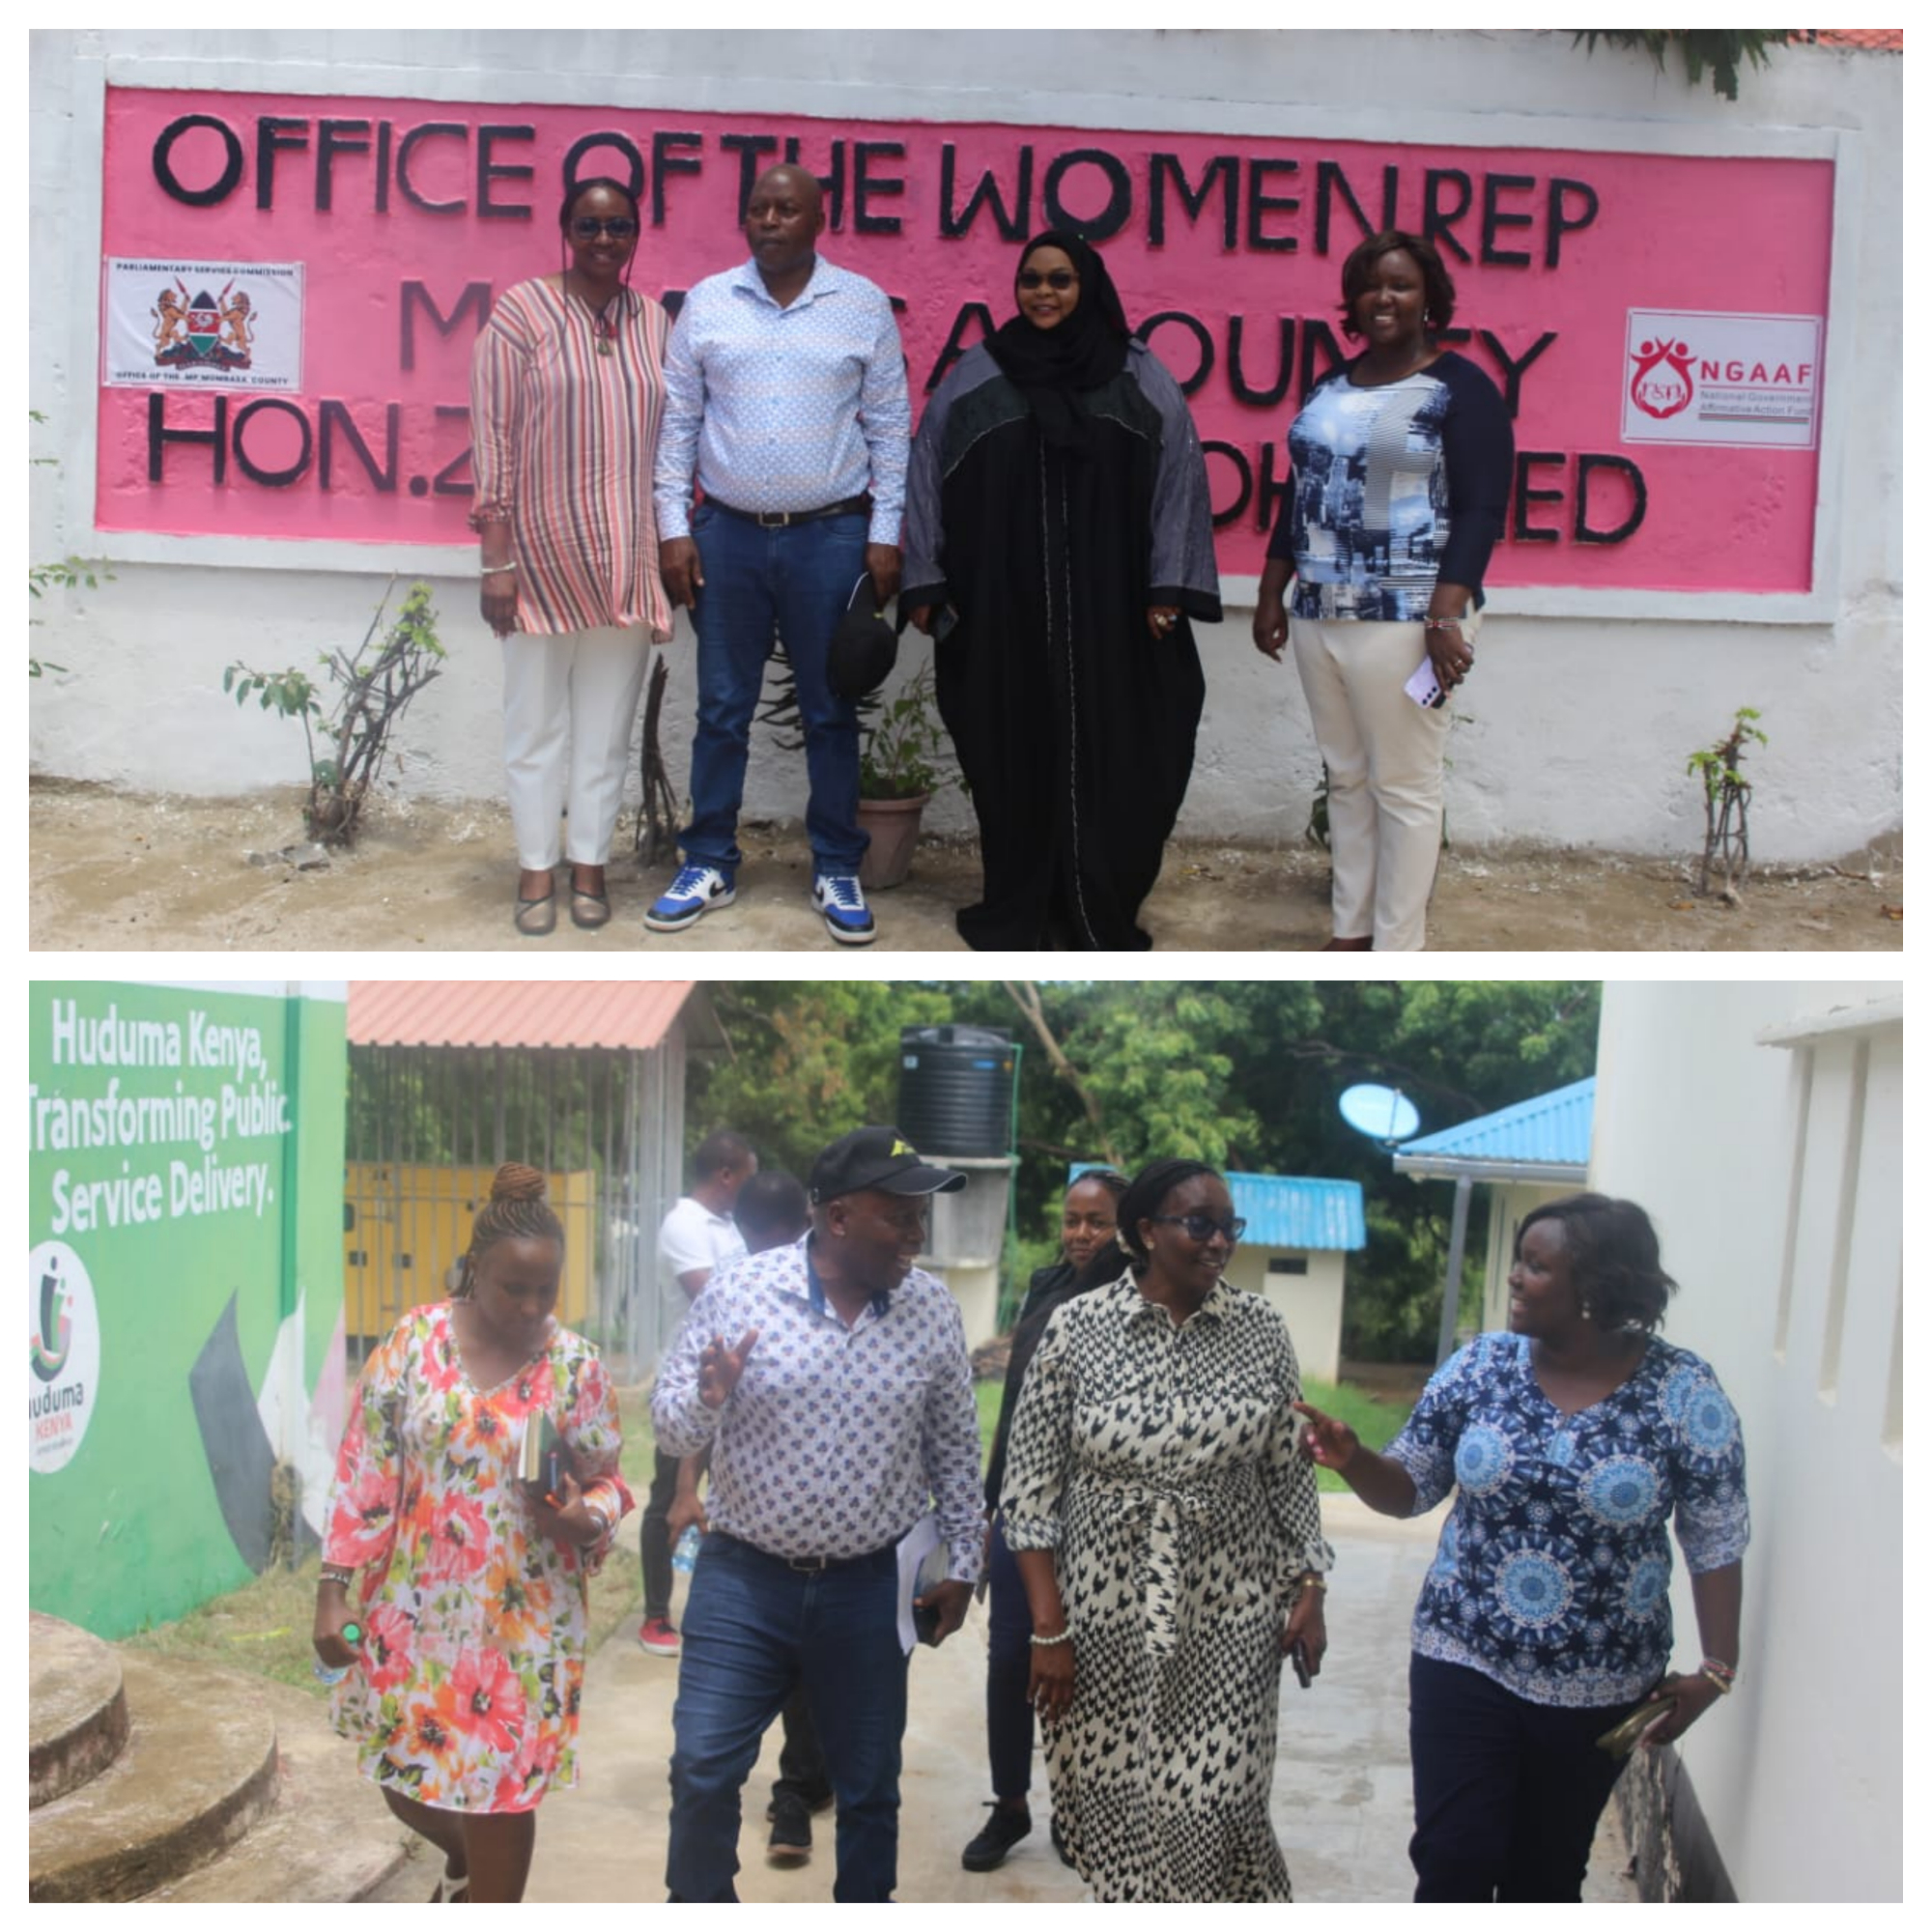 MEMBERS SERVICES AND FACILITIES COMMITTEE COLLECT VIEWS FROM  CONSTITUENCY OFFICES' STAFF